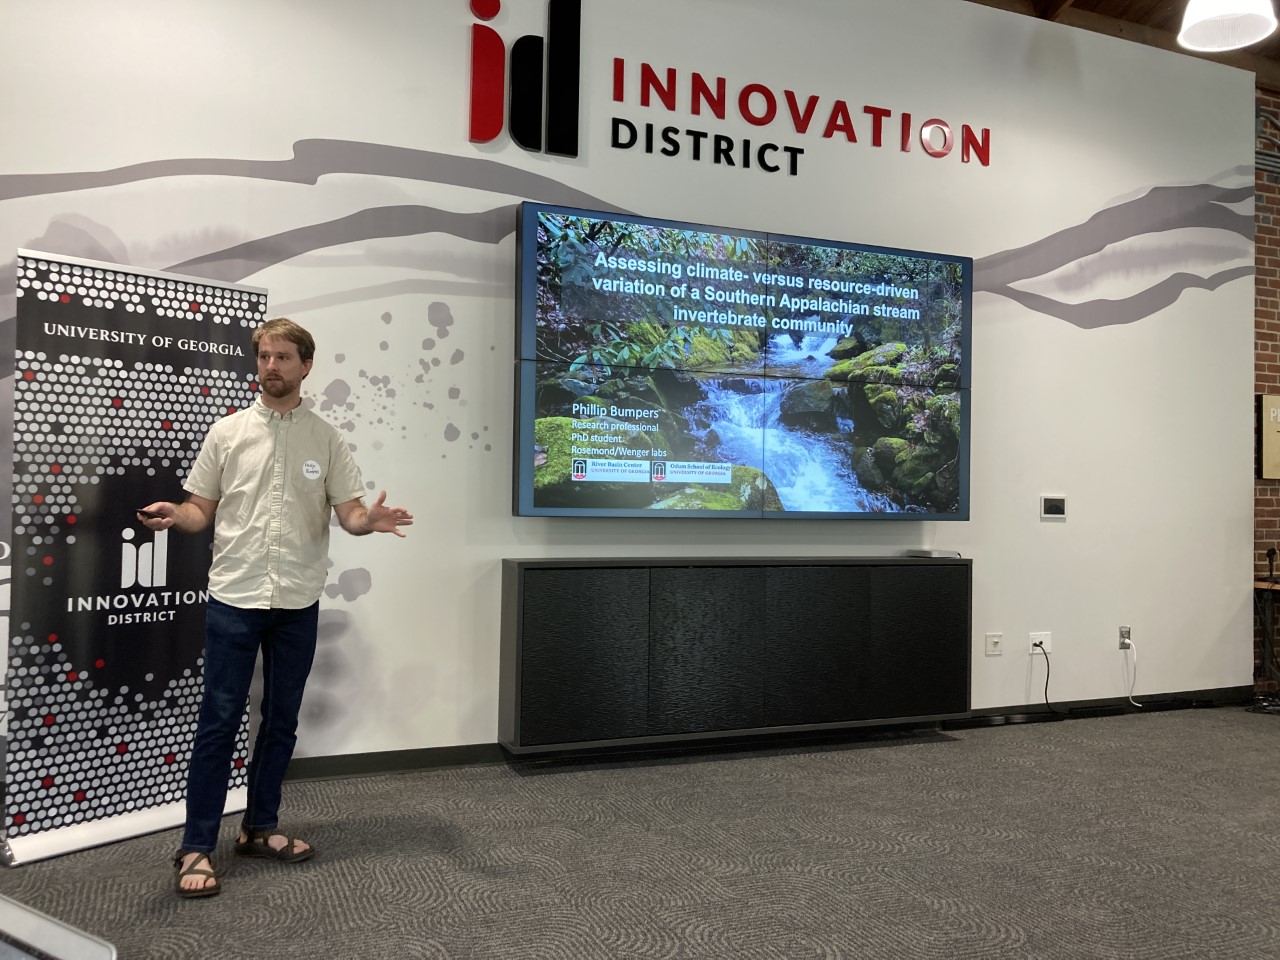 Phillip Bumpers presents his research wearing sandals, jeans, and a white collared shirt. A screen displays the image of a stream and text. Above the screen in black and red lettering reads the words Innovation District.